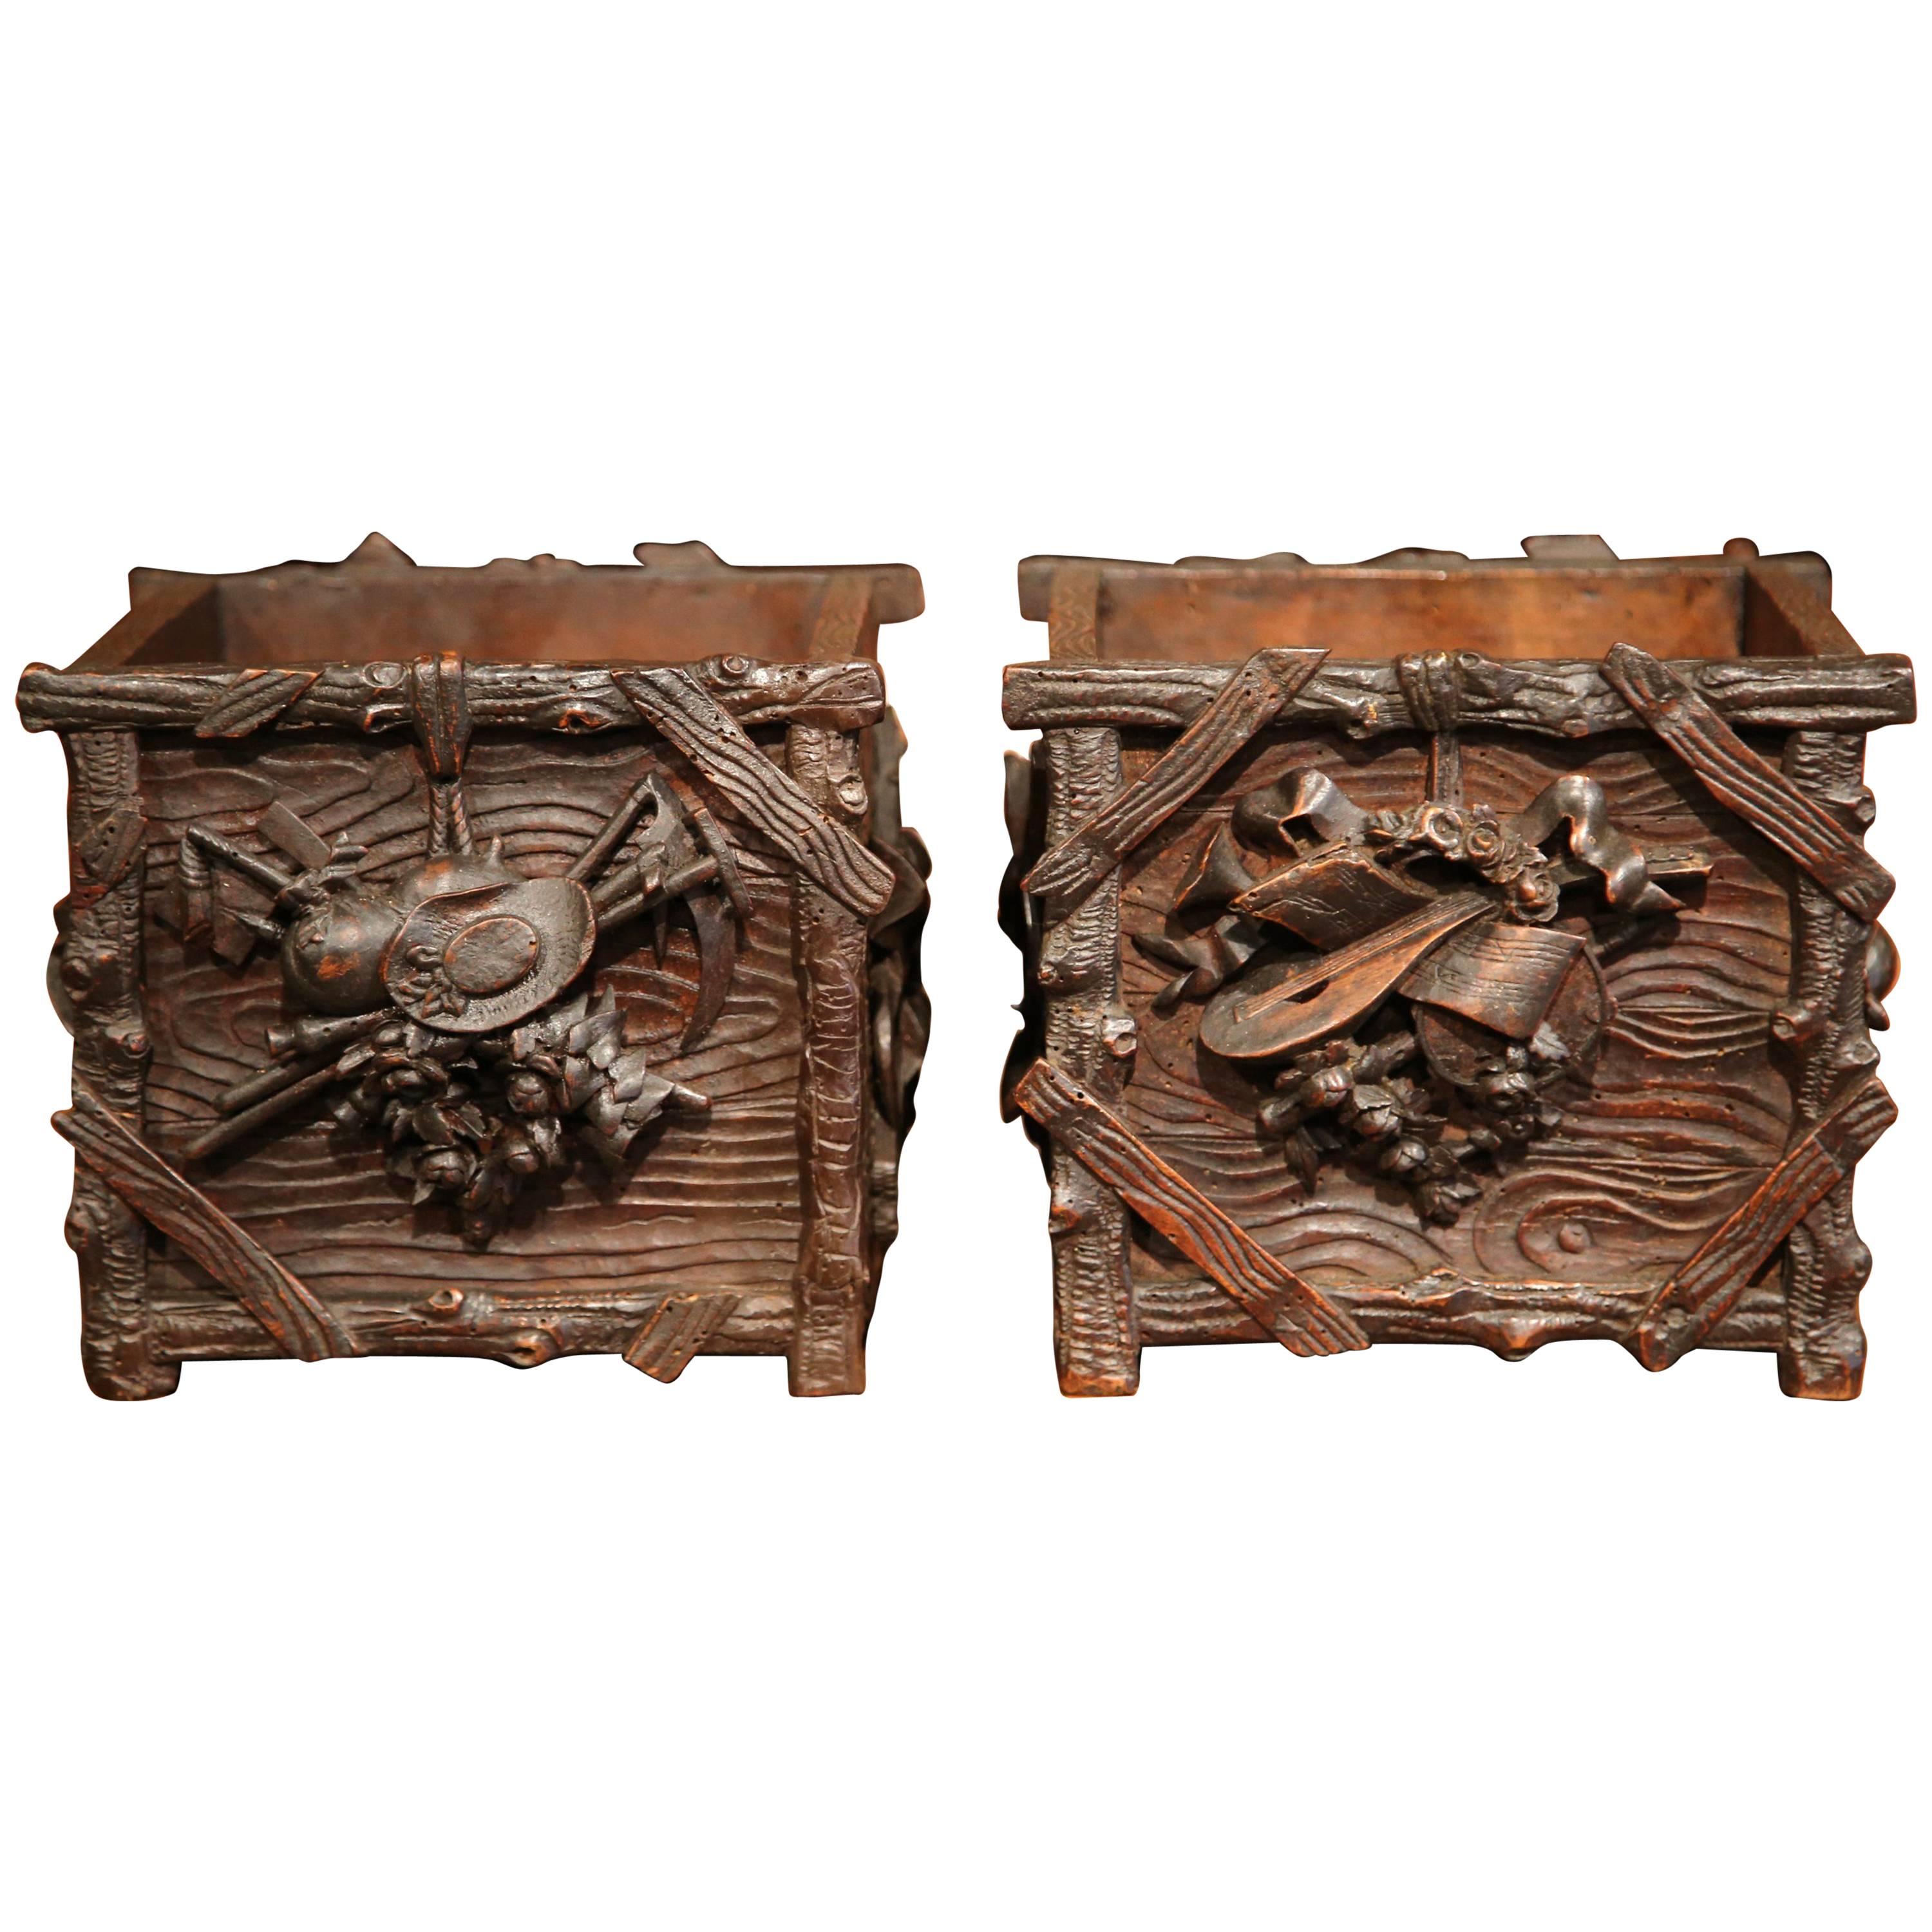 Pair of 19th Century French Carved Walnut Black Forest Square Jardinieres